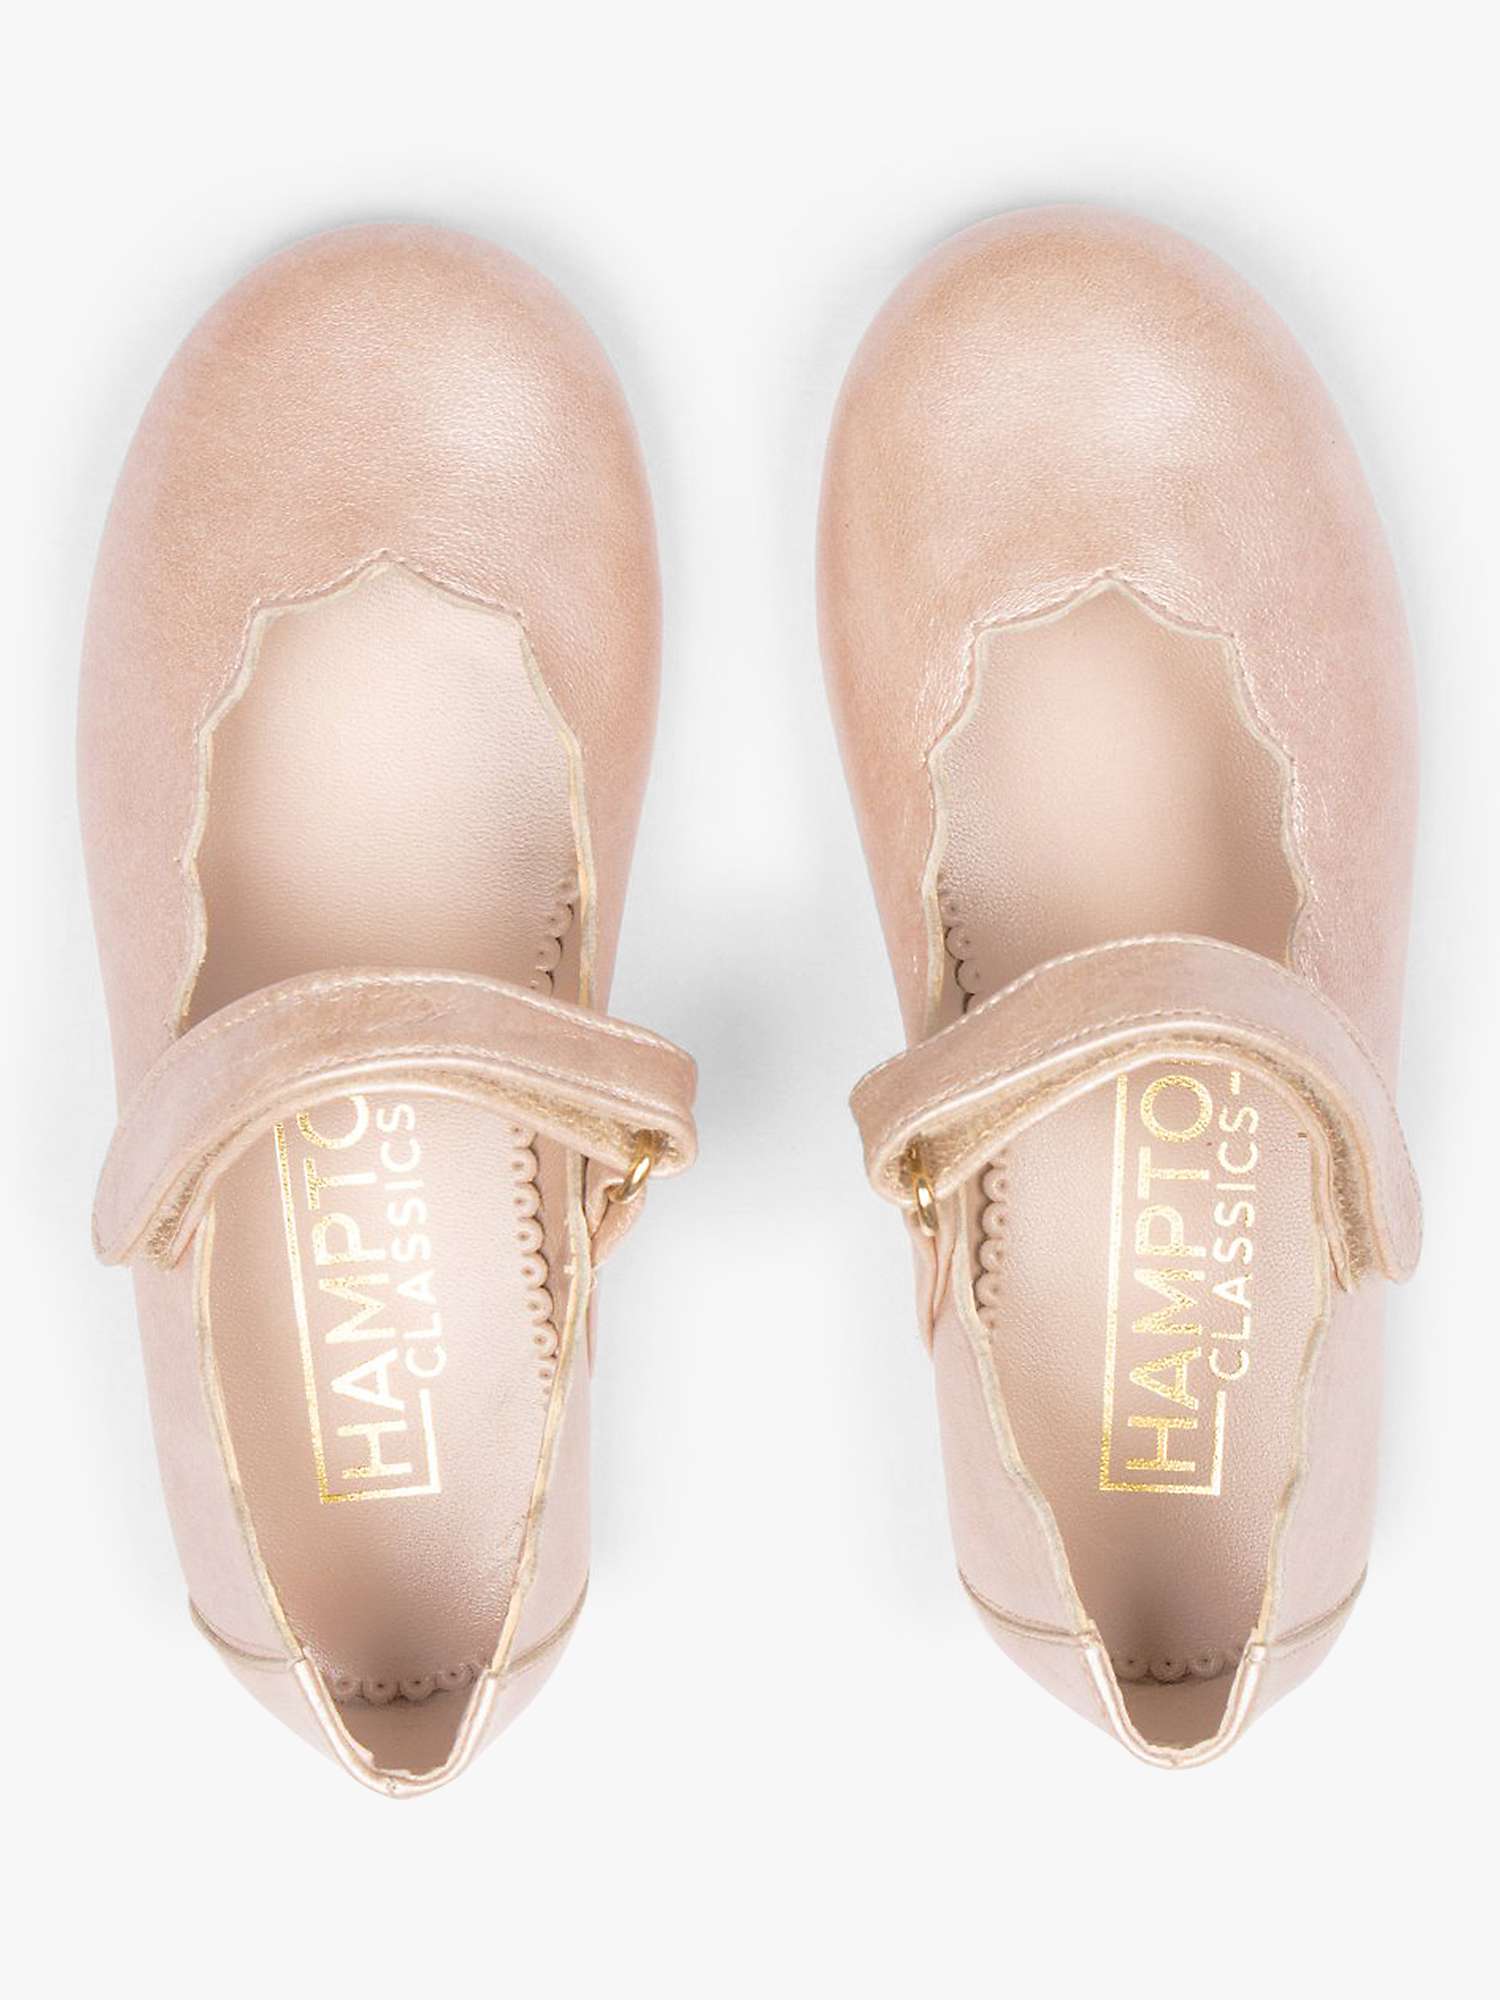 Buy Trotters Hampton Classics Kids' Lilly Party Shoes Online at johnlewis.com